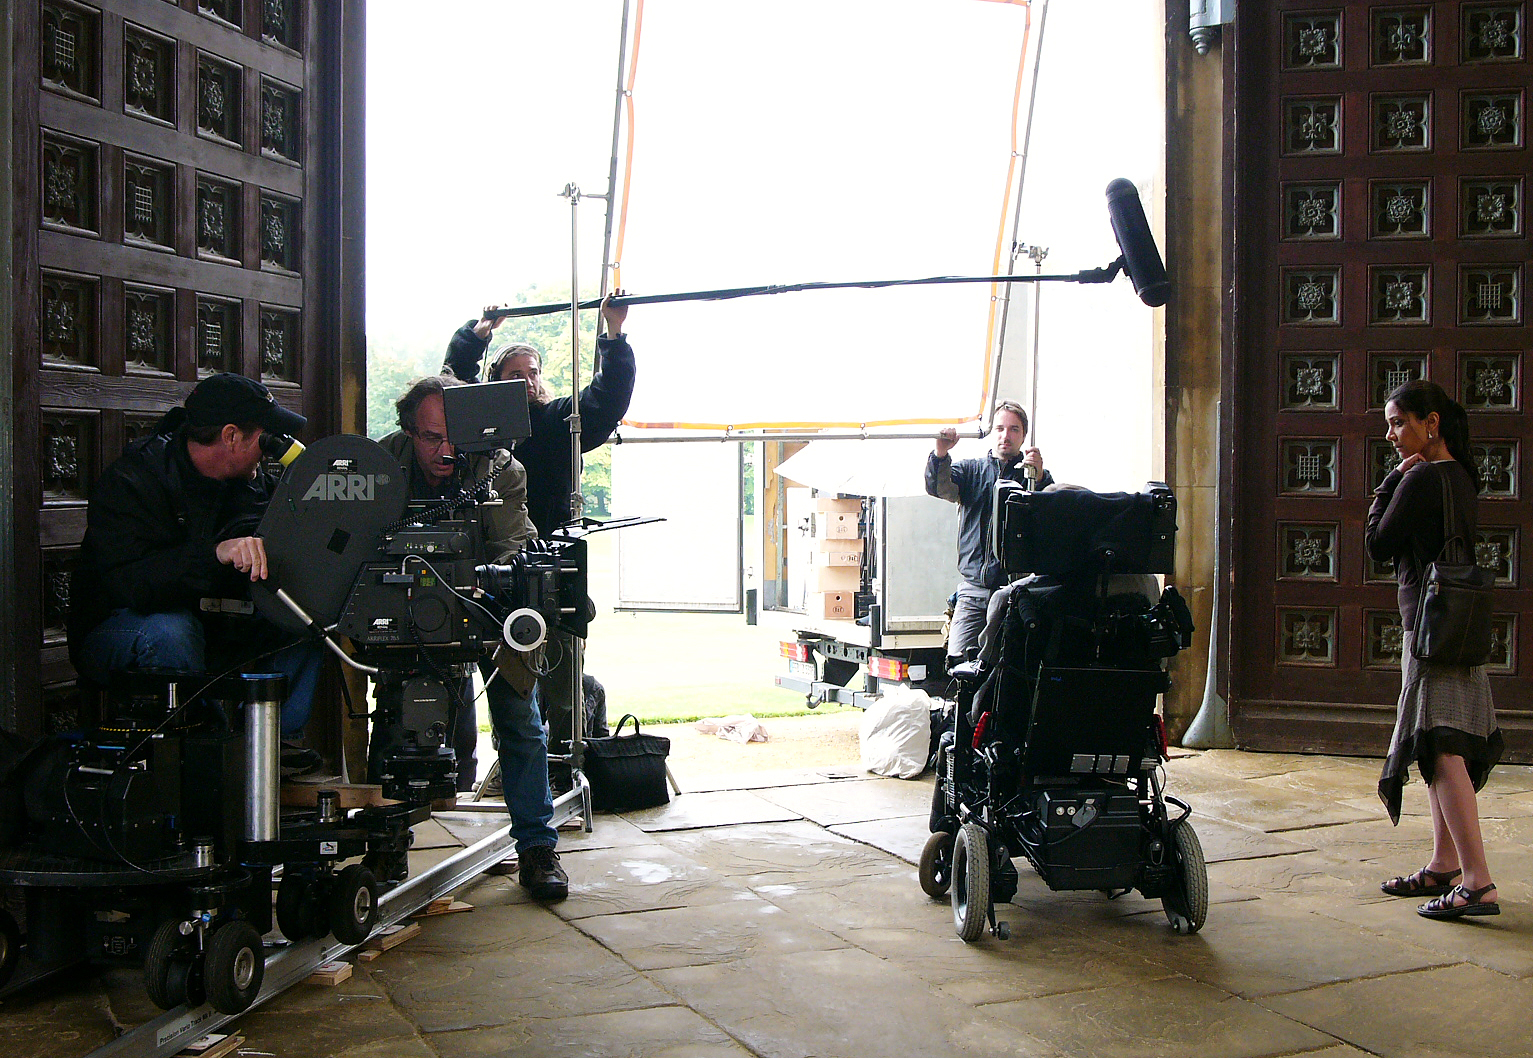 Matt shooting with the Arri 765 65mm camera in Cambridge, England for 